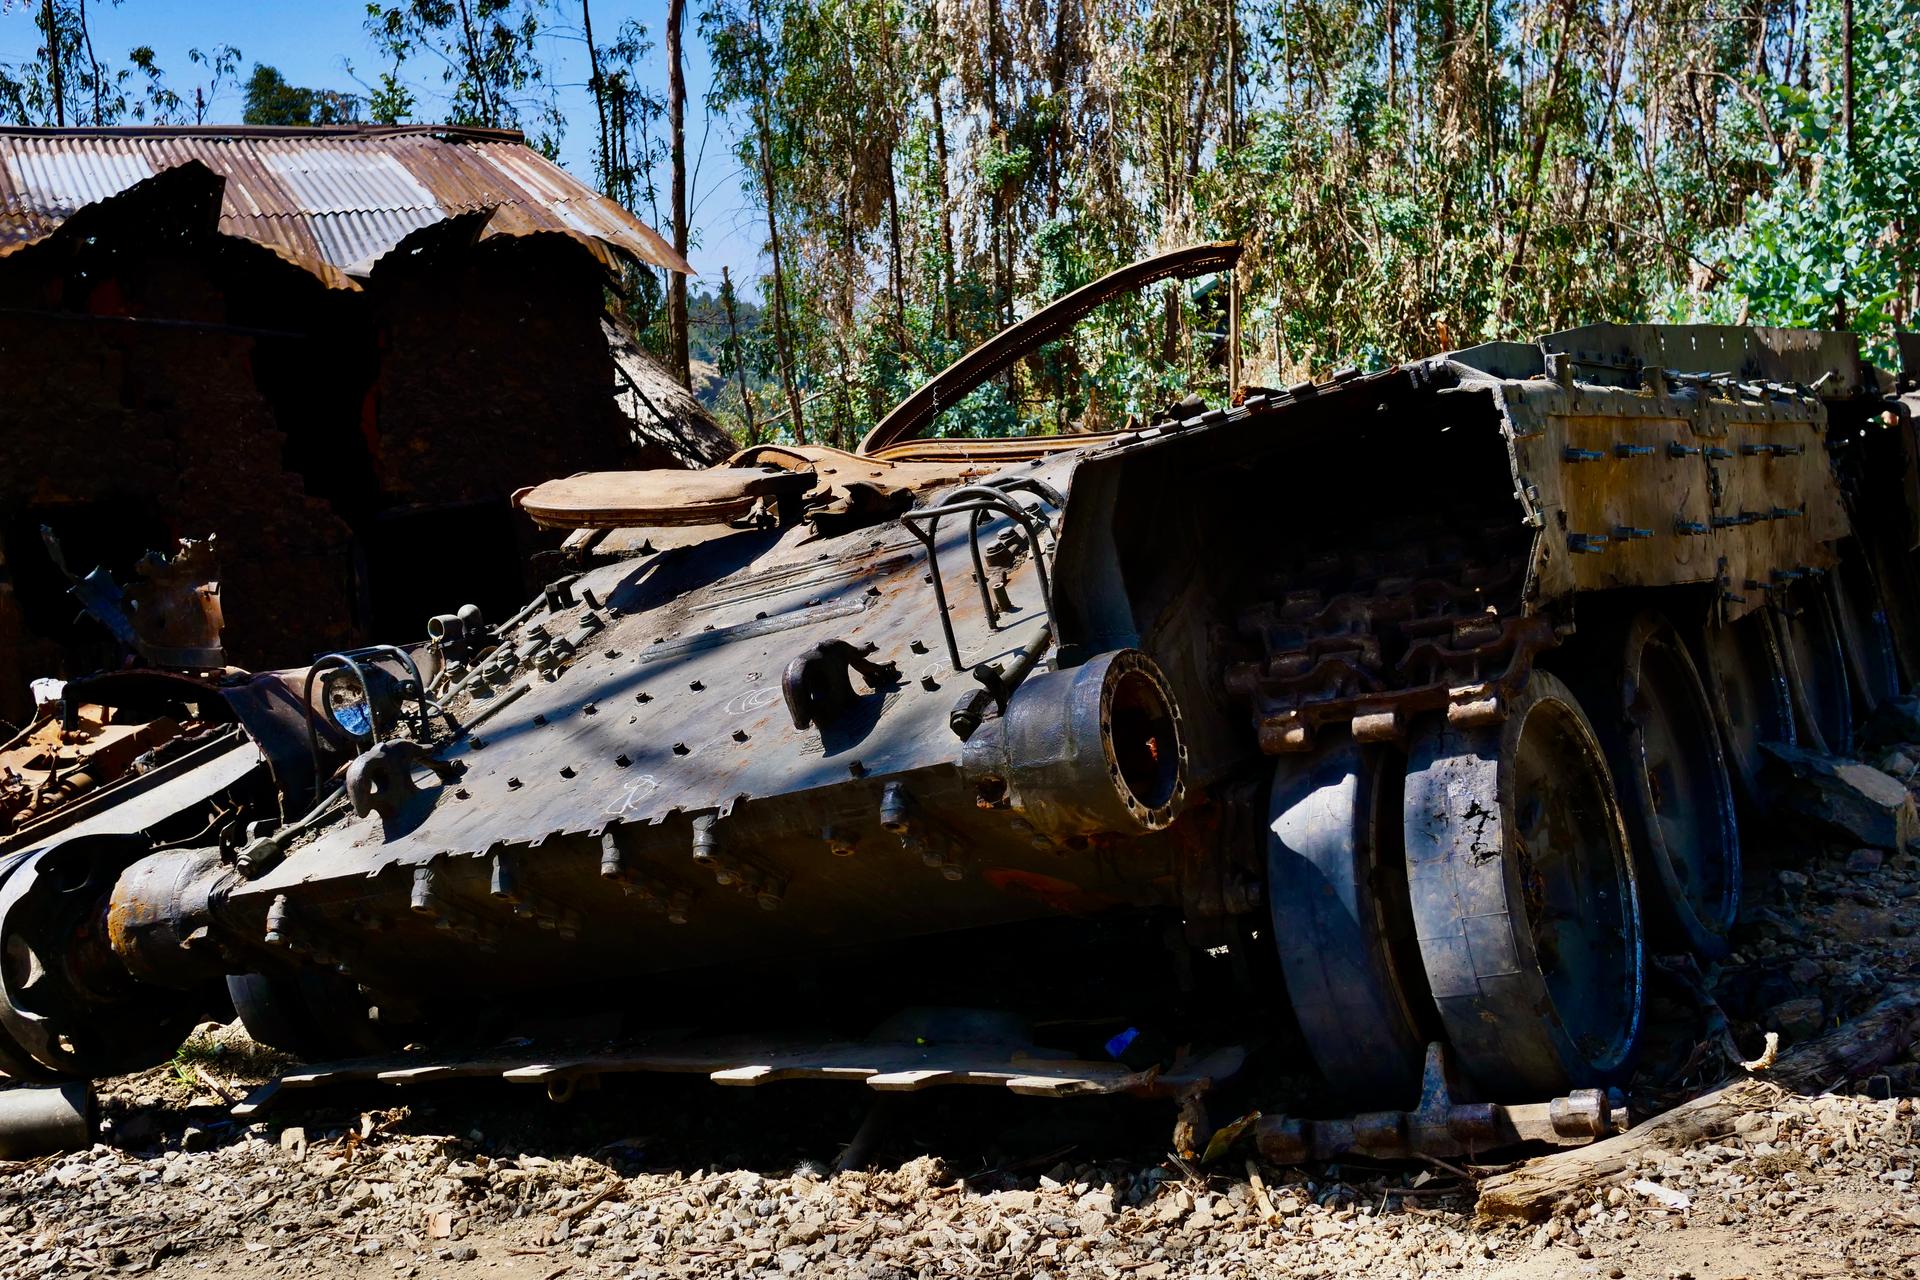 Overturned military tank in front of homes in Amhara Region, Ethiopia, Feb. 17, 2022